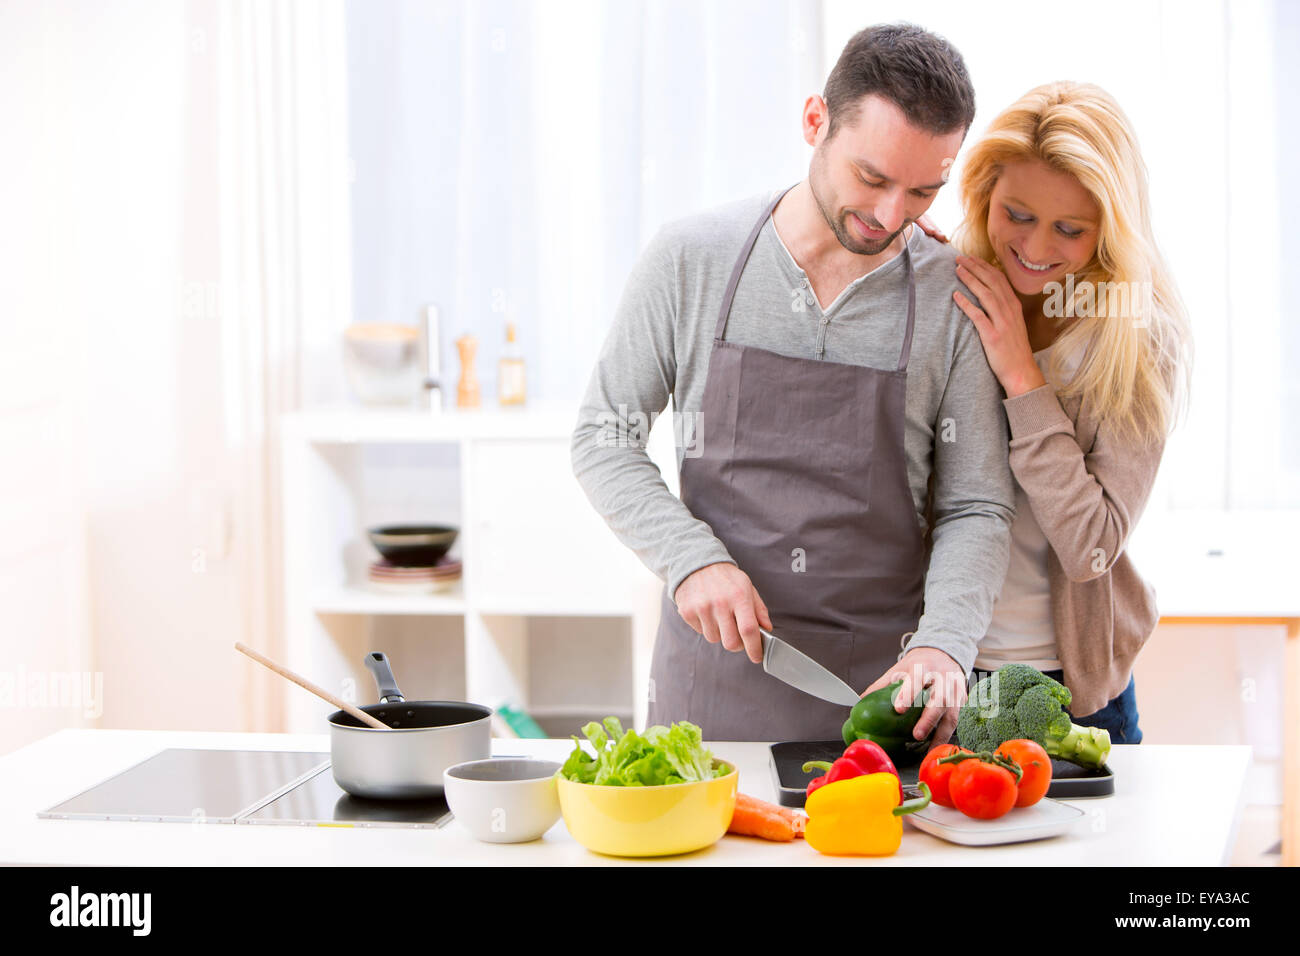 View of a Young attractive couple cooking in a kitchen Stock Photo